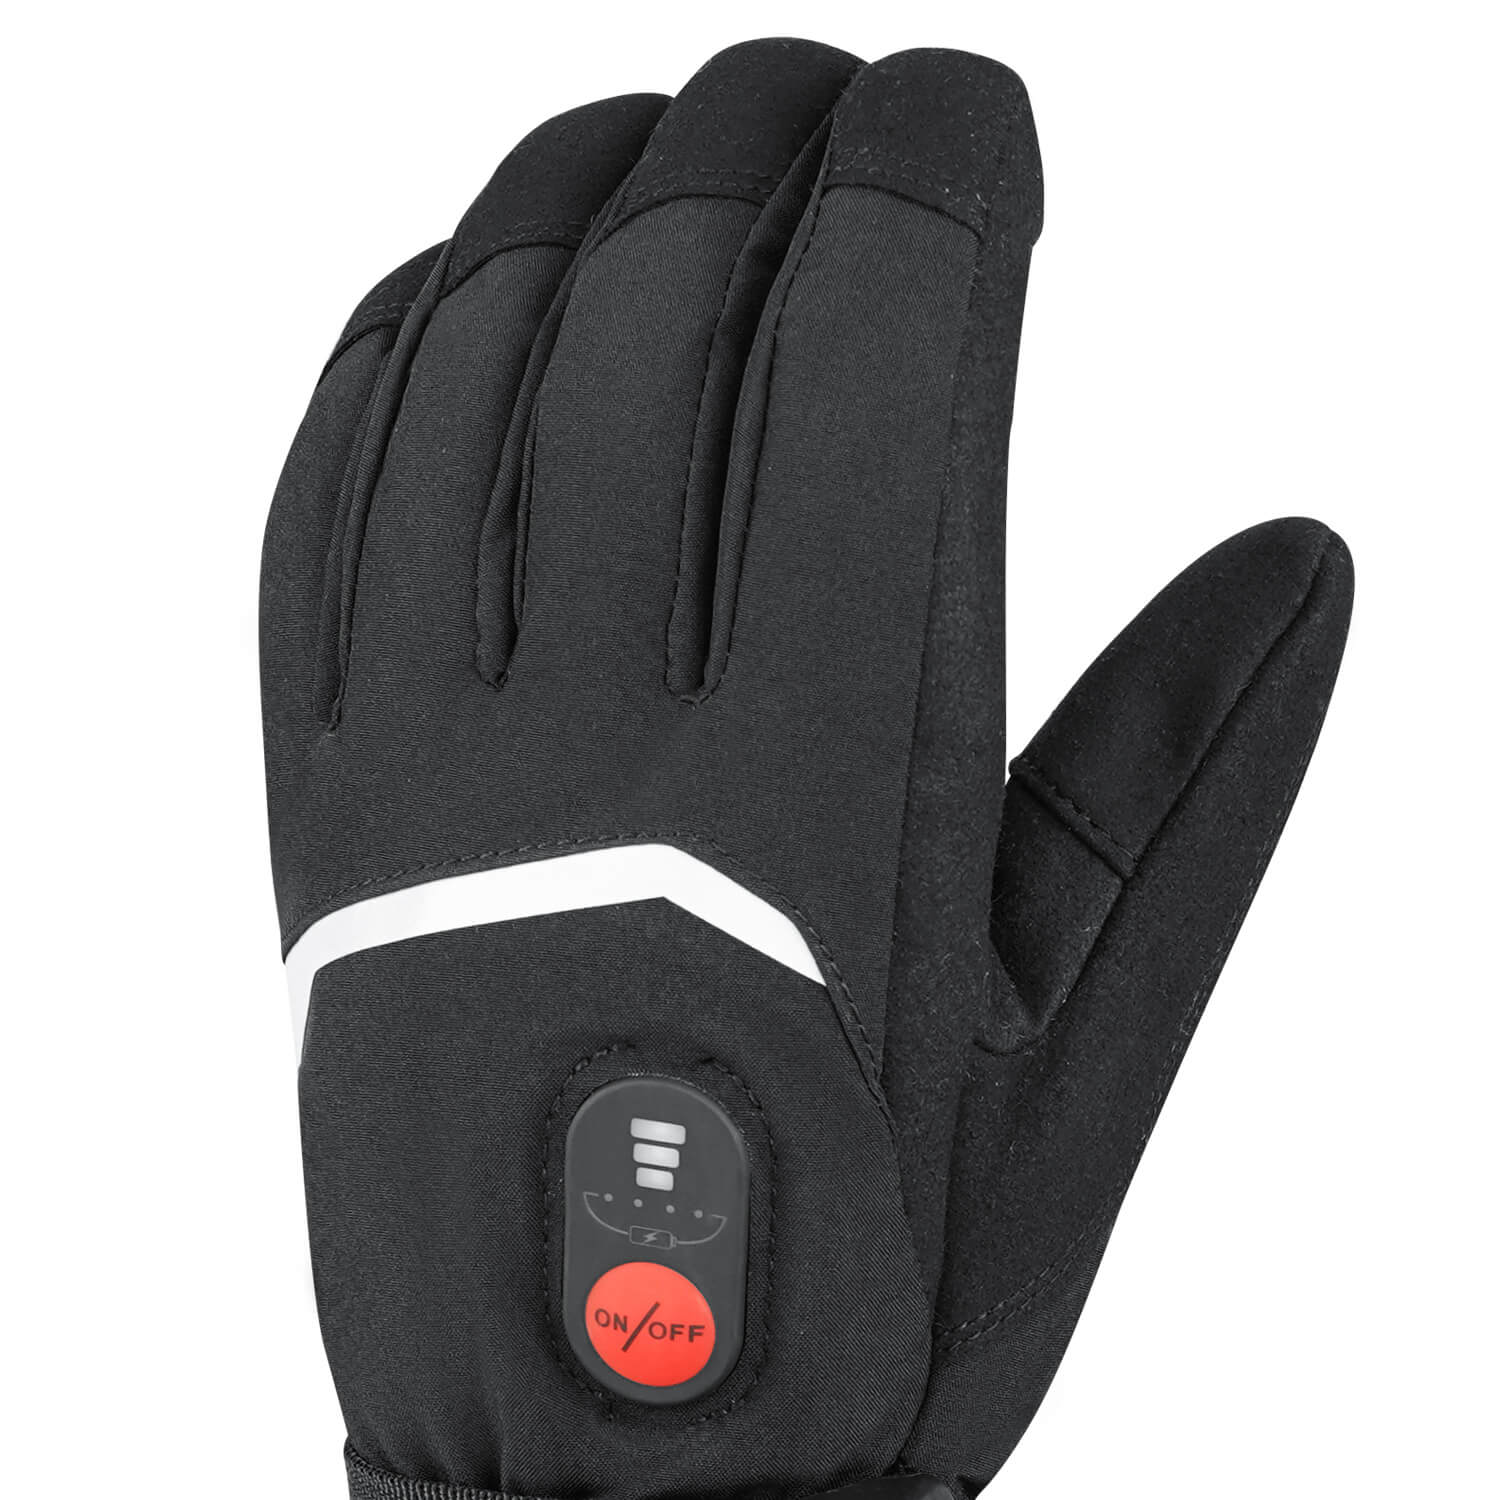 Five Fingers Heated Gloves